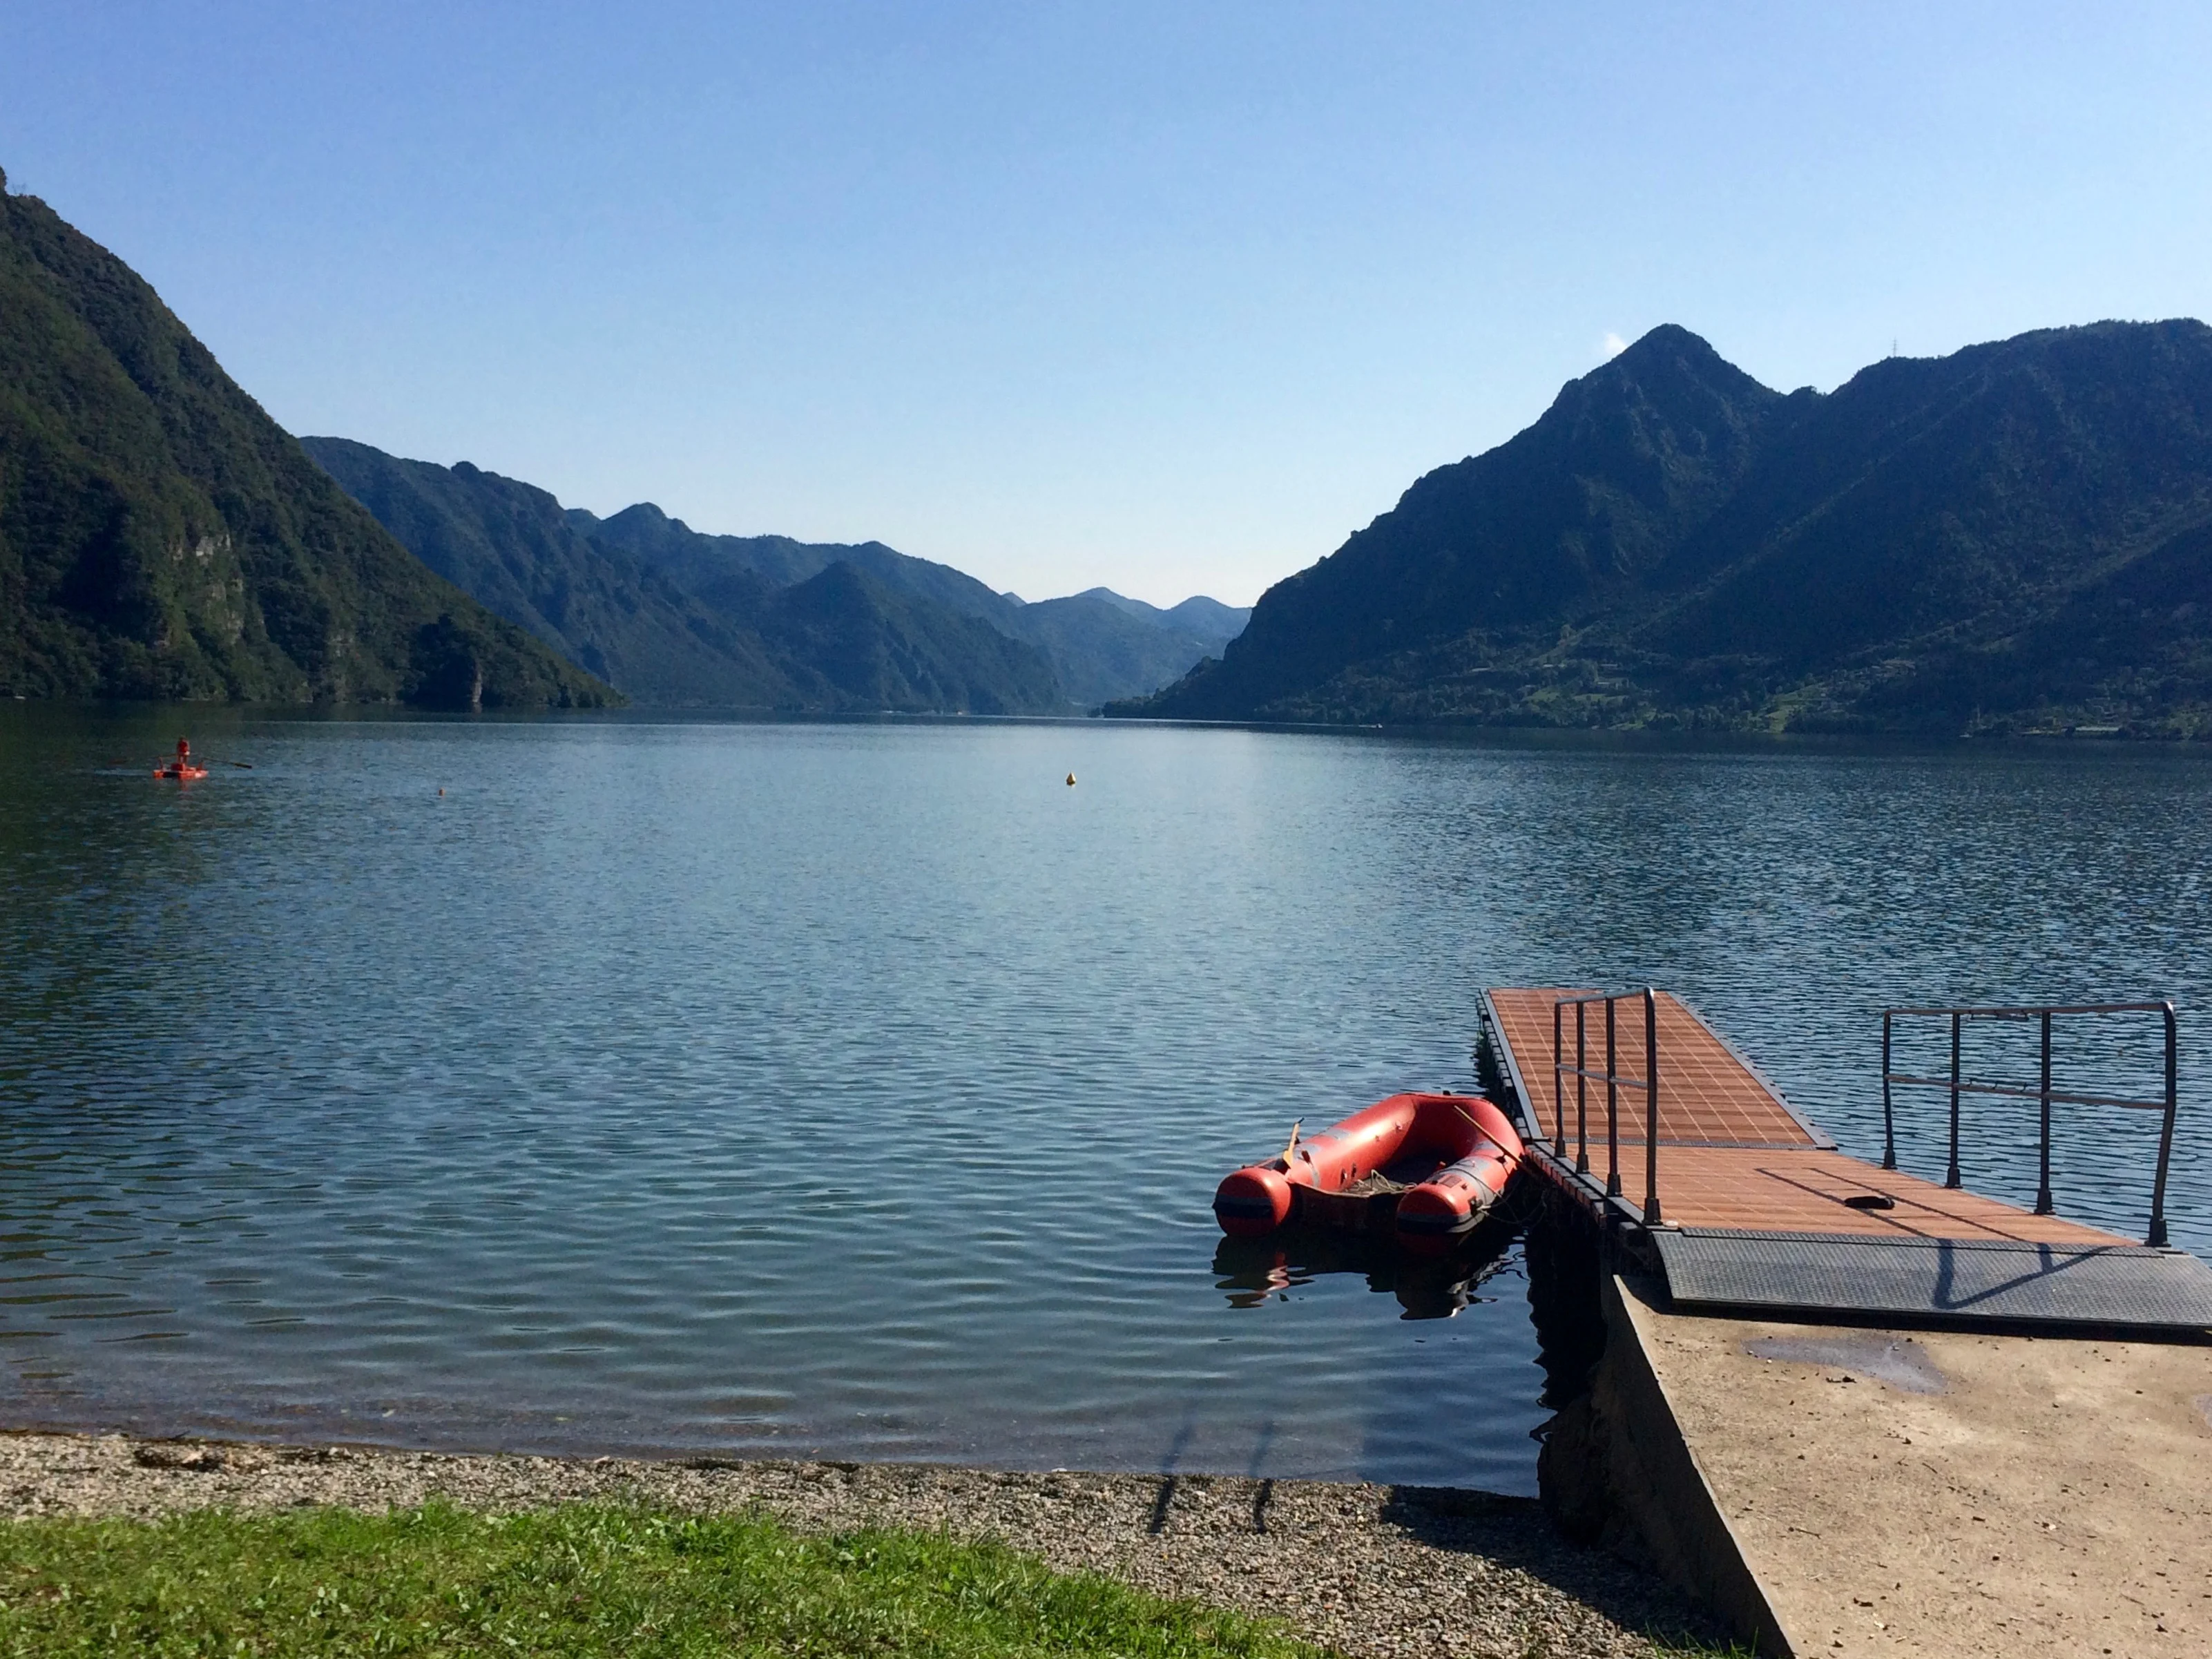 Great dock to jump off and into Lake Idro!